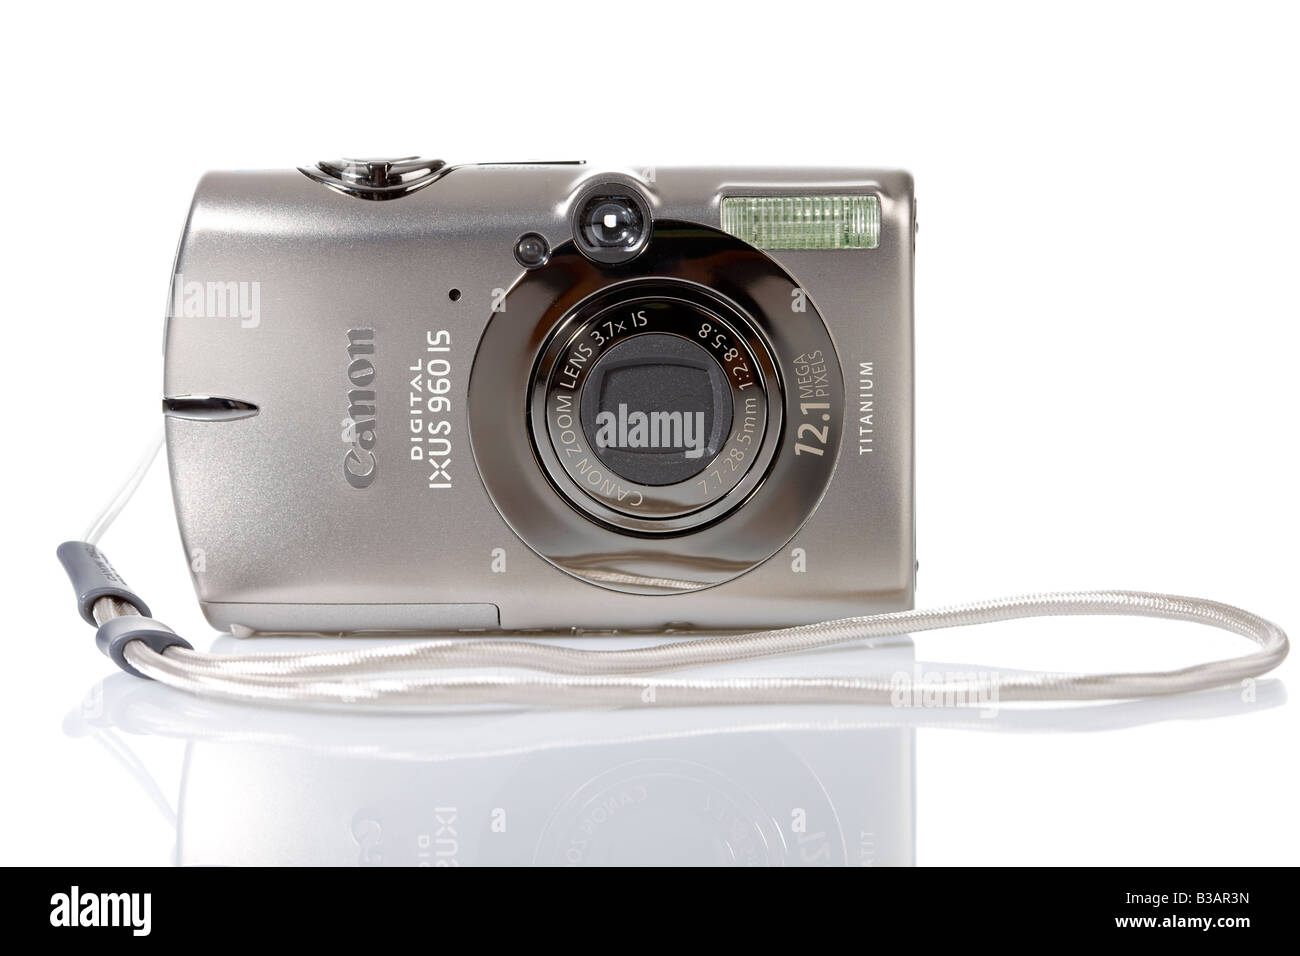 Canon PowerShot SX620 HS -Specification - PowerShot and IXUS digital  compact cameras - Canon Central and North Africa